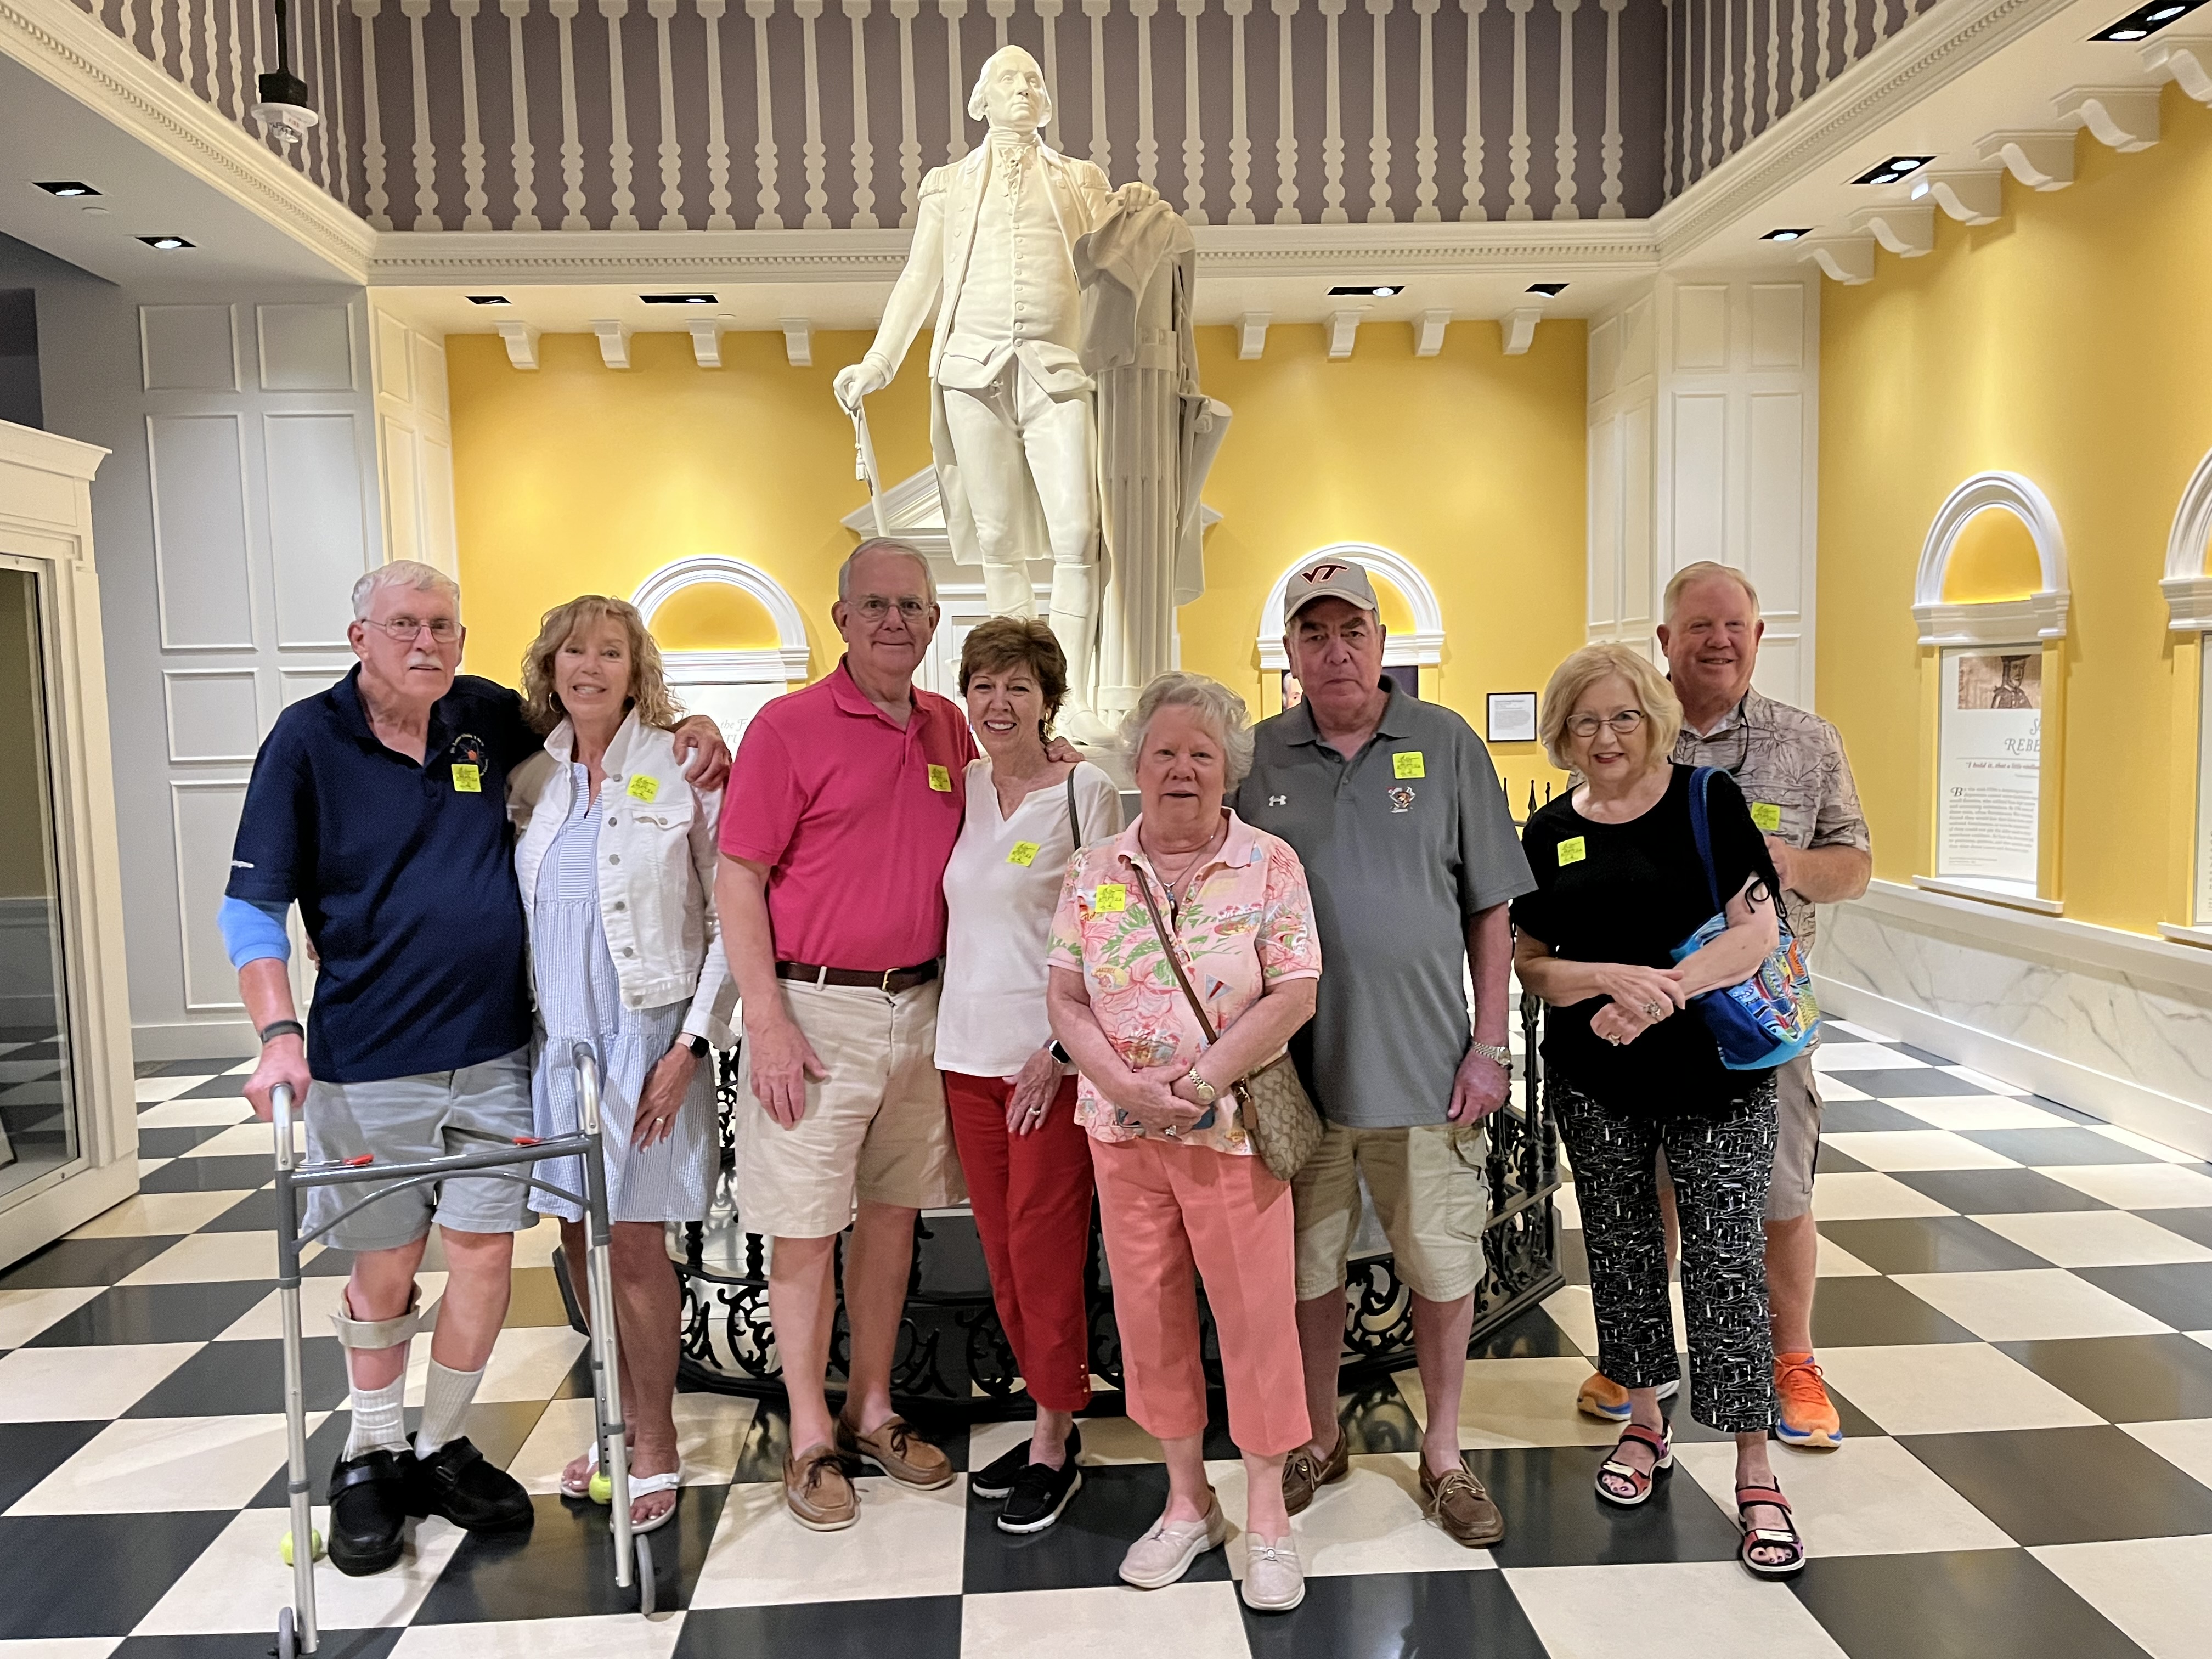 The group stands in front of a white statue in an ornate yellow room